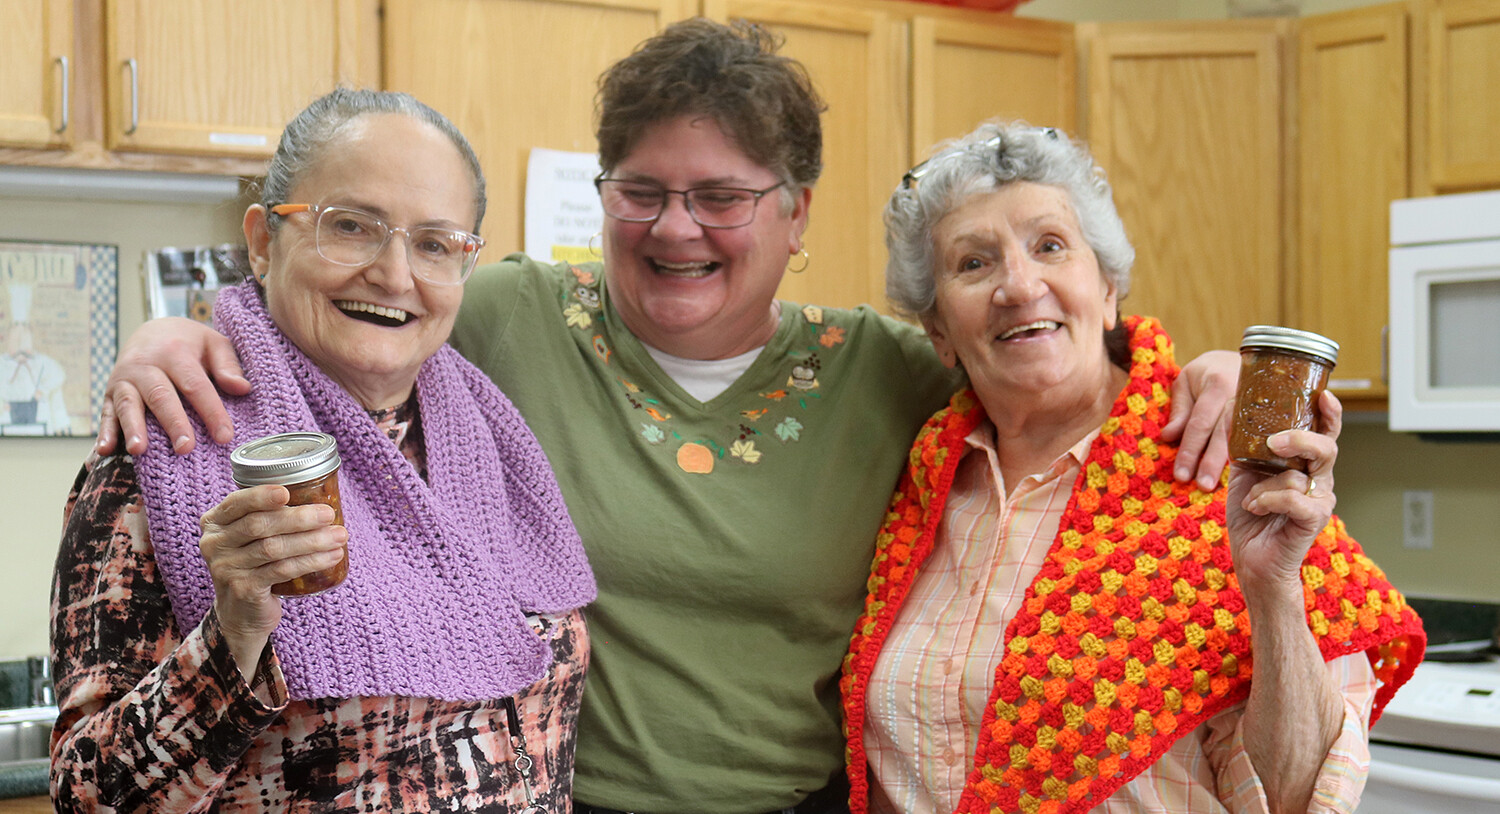 Cathedral Square residents Maria Charbonneau (left) and Theresa Hinman (right) are all smiles after receiving homemade chili and handmade shawls from Rose Cheeseman.